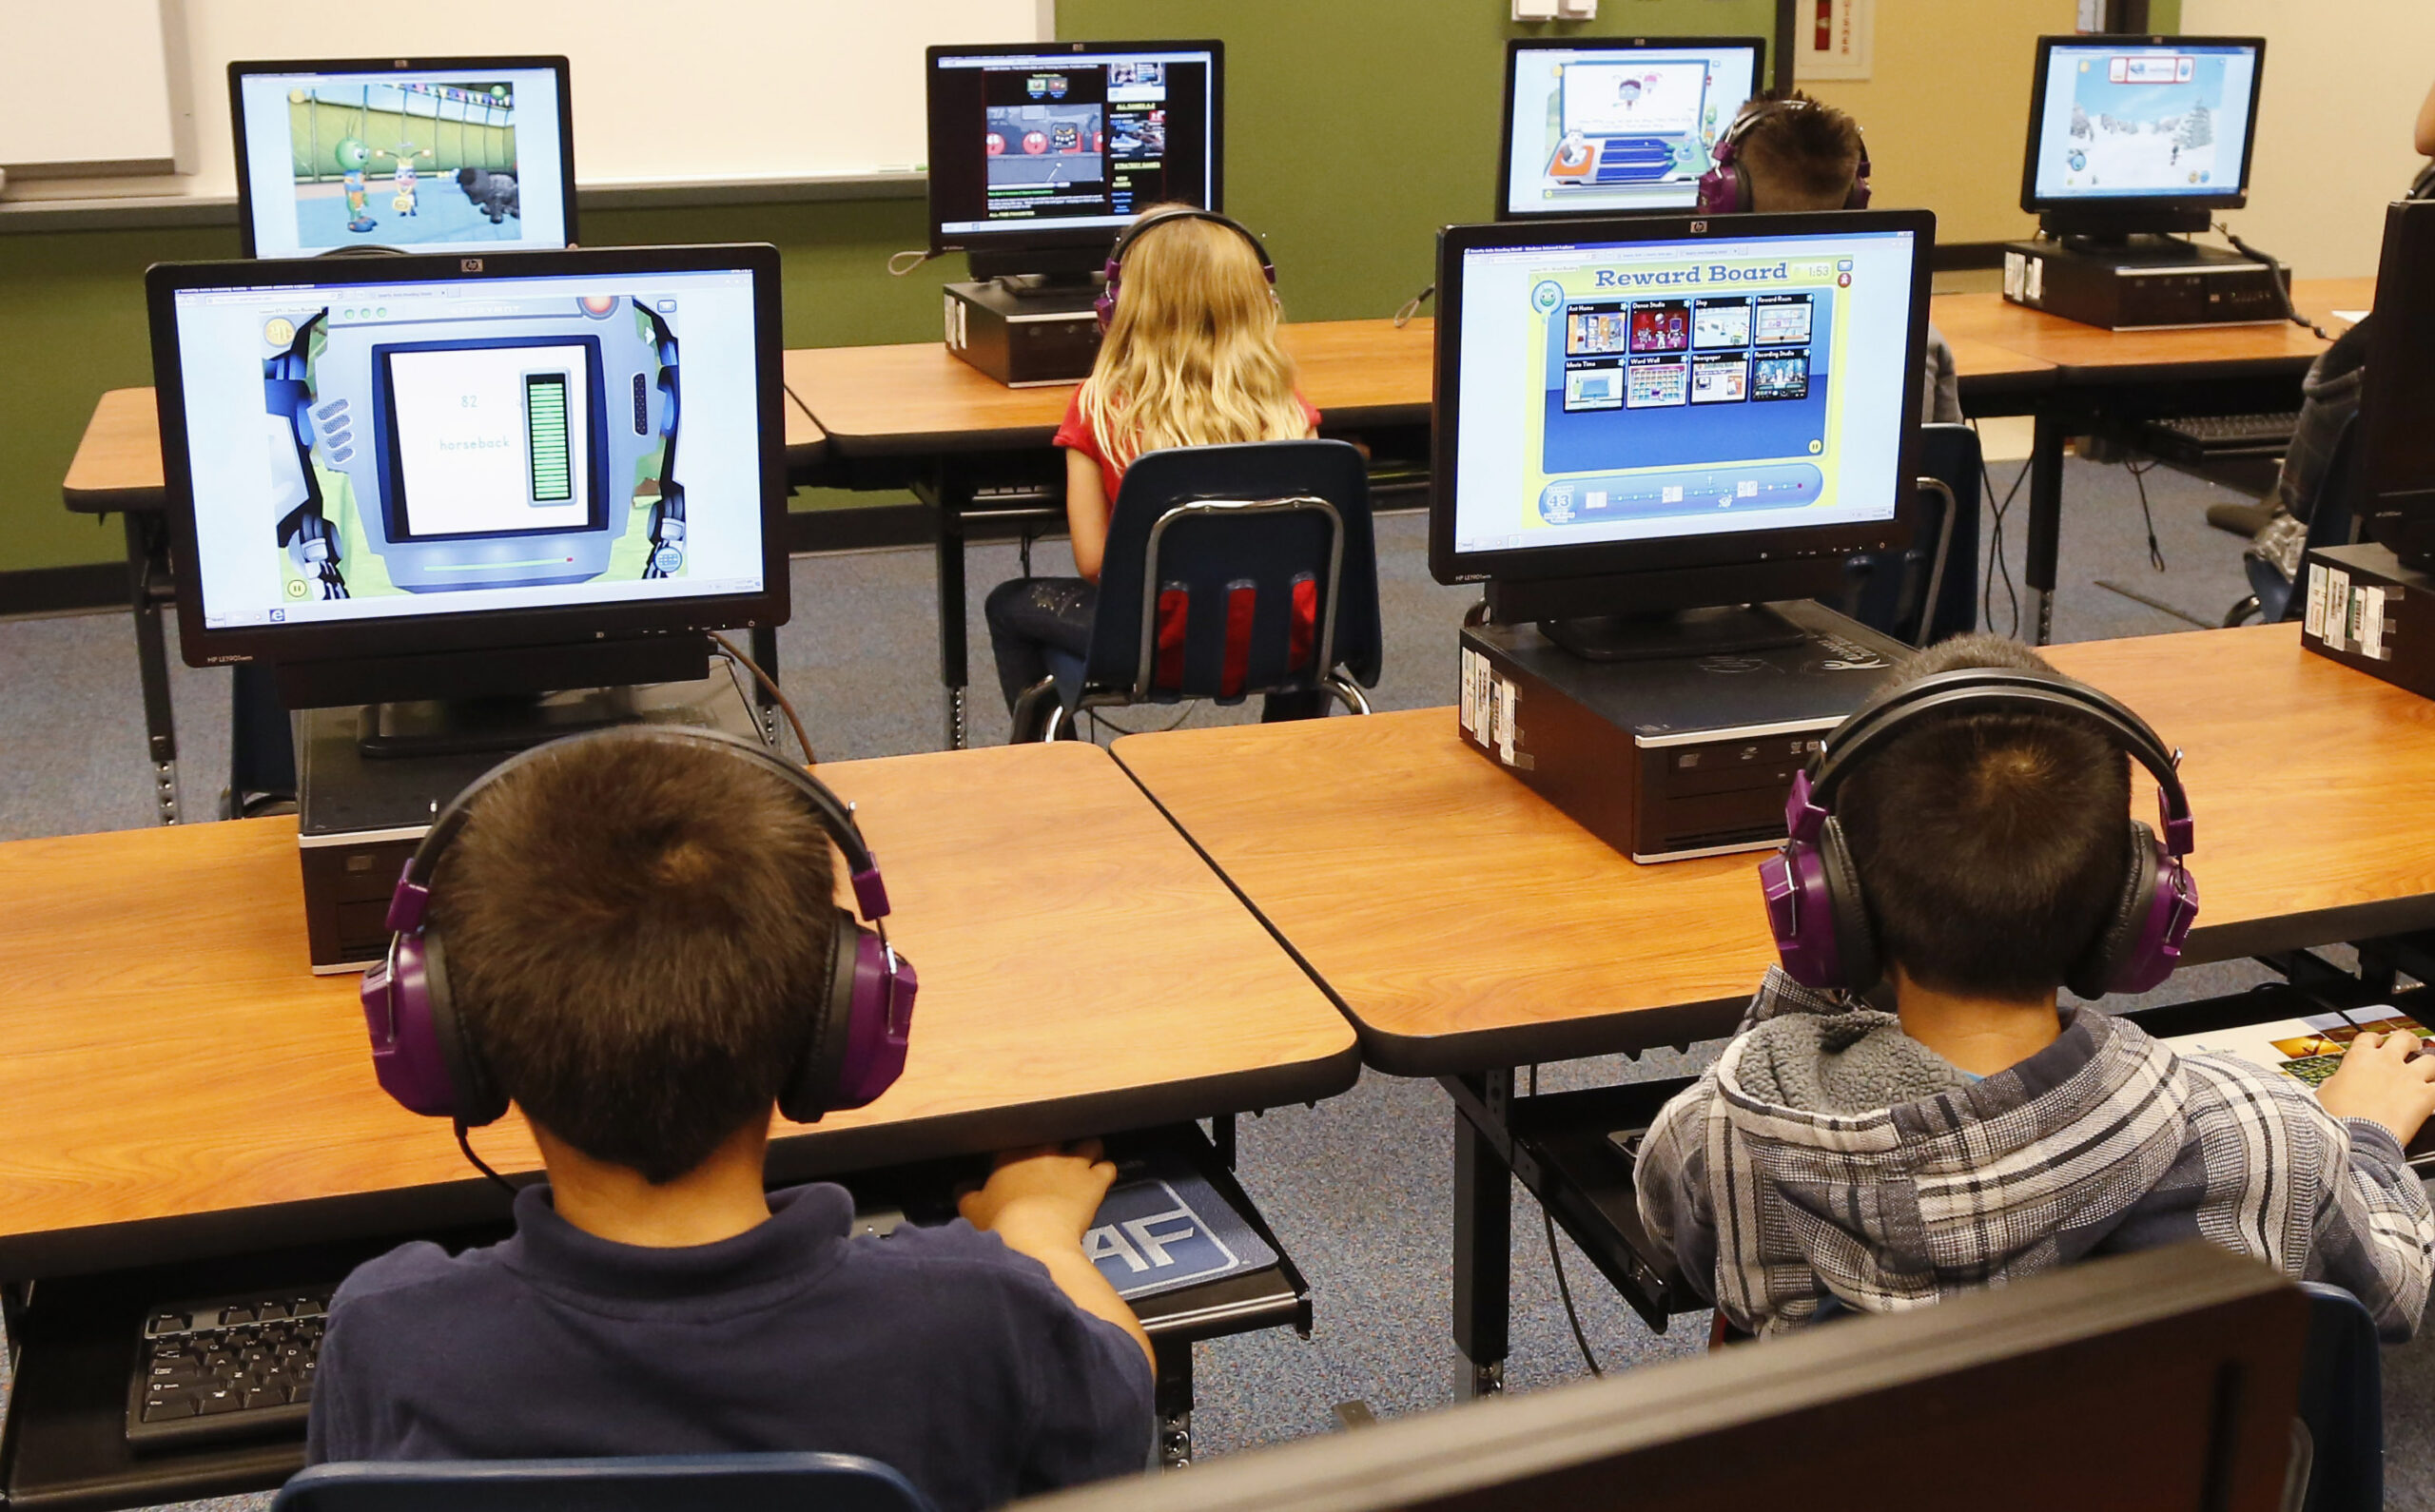 Children on computers in a classroom